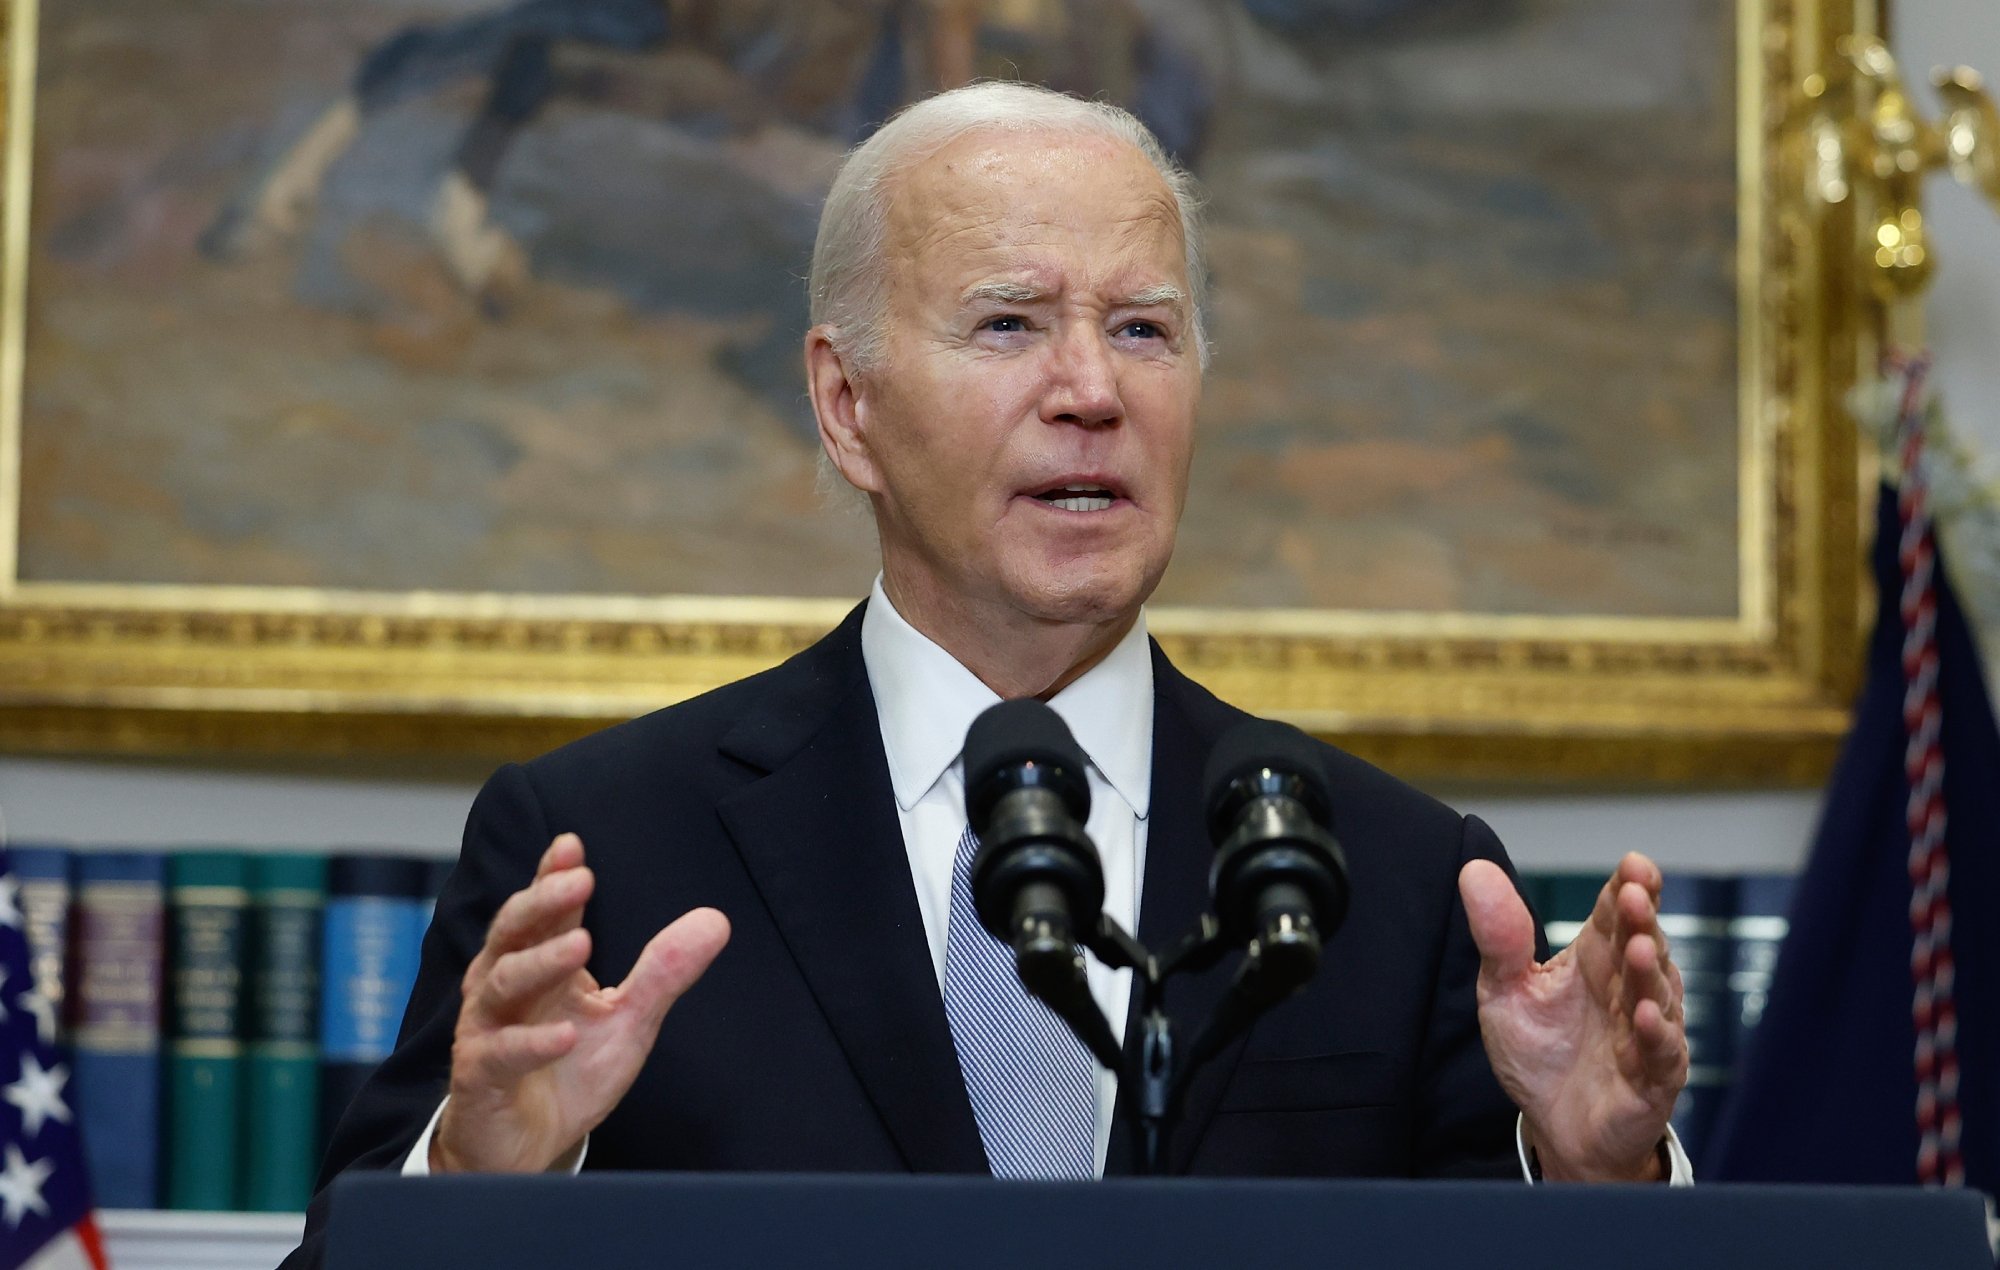 Joe Biden has officially stepped down as the US Democratic presidential candidate